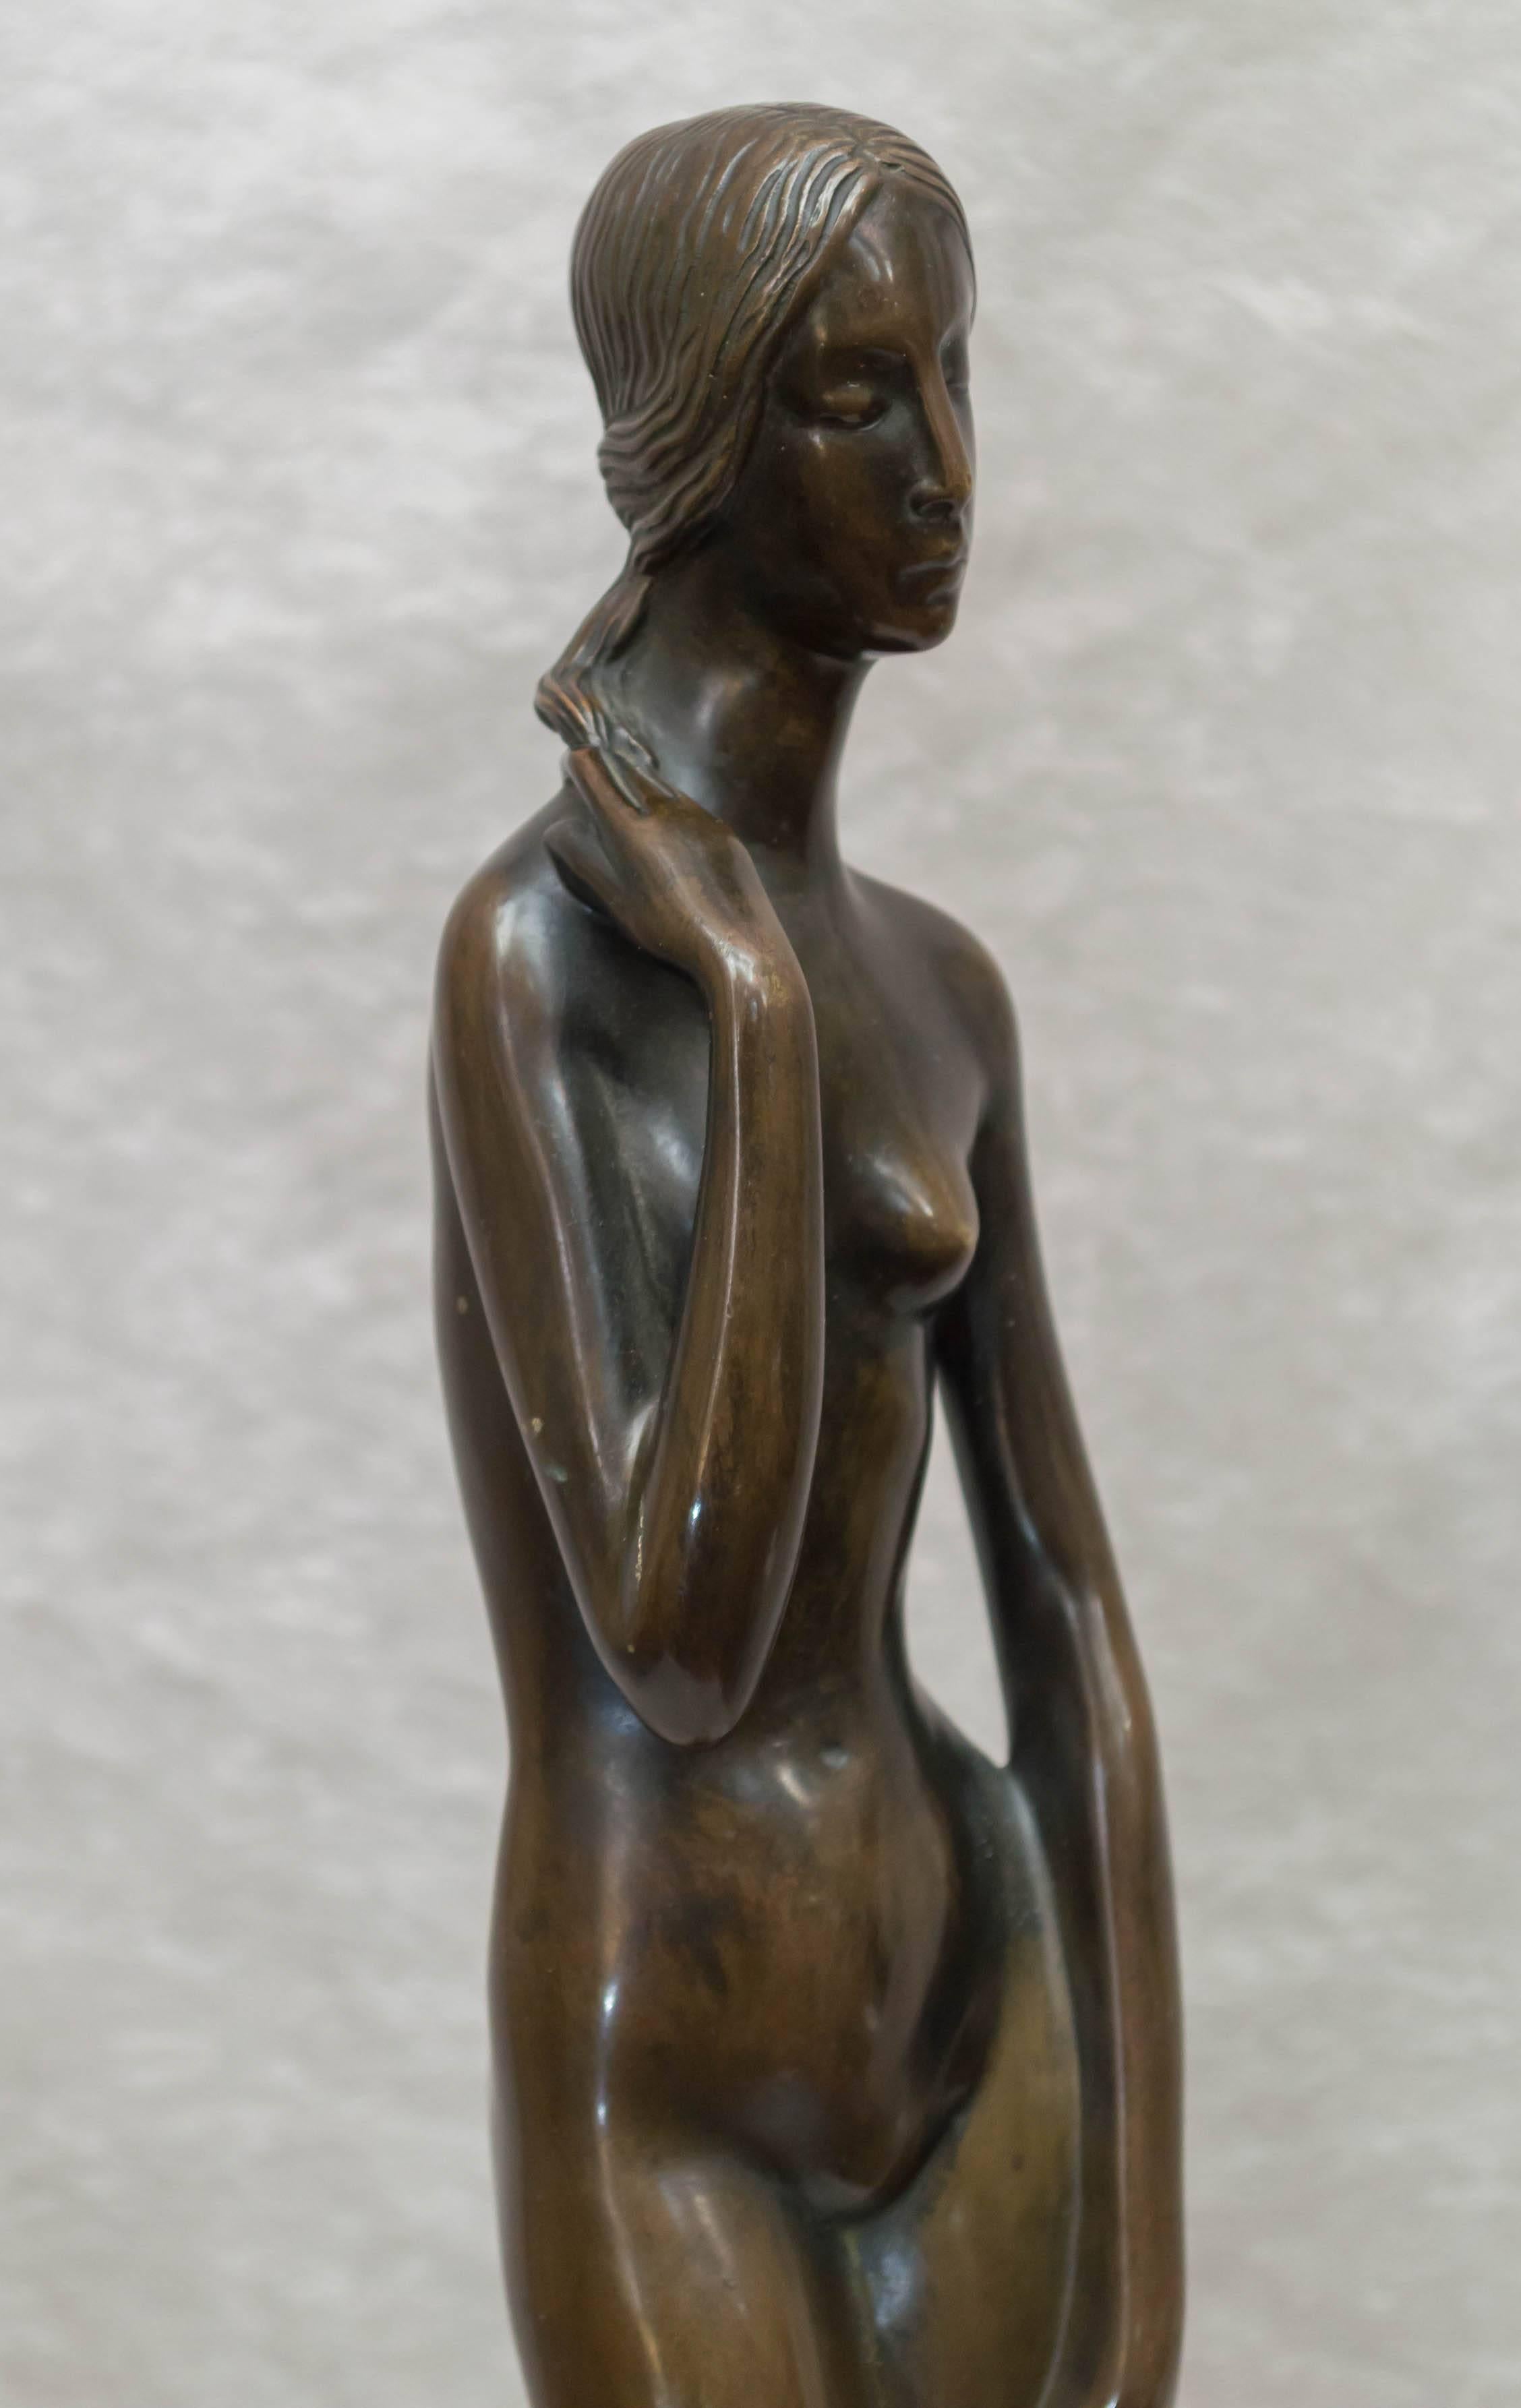 Hand-Crafted Art Deco / Moderne Bronze Figure of a Nude, American, Signed Joseph Motto